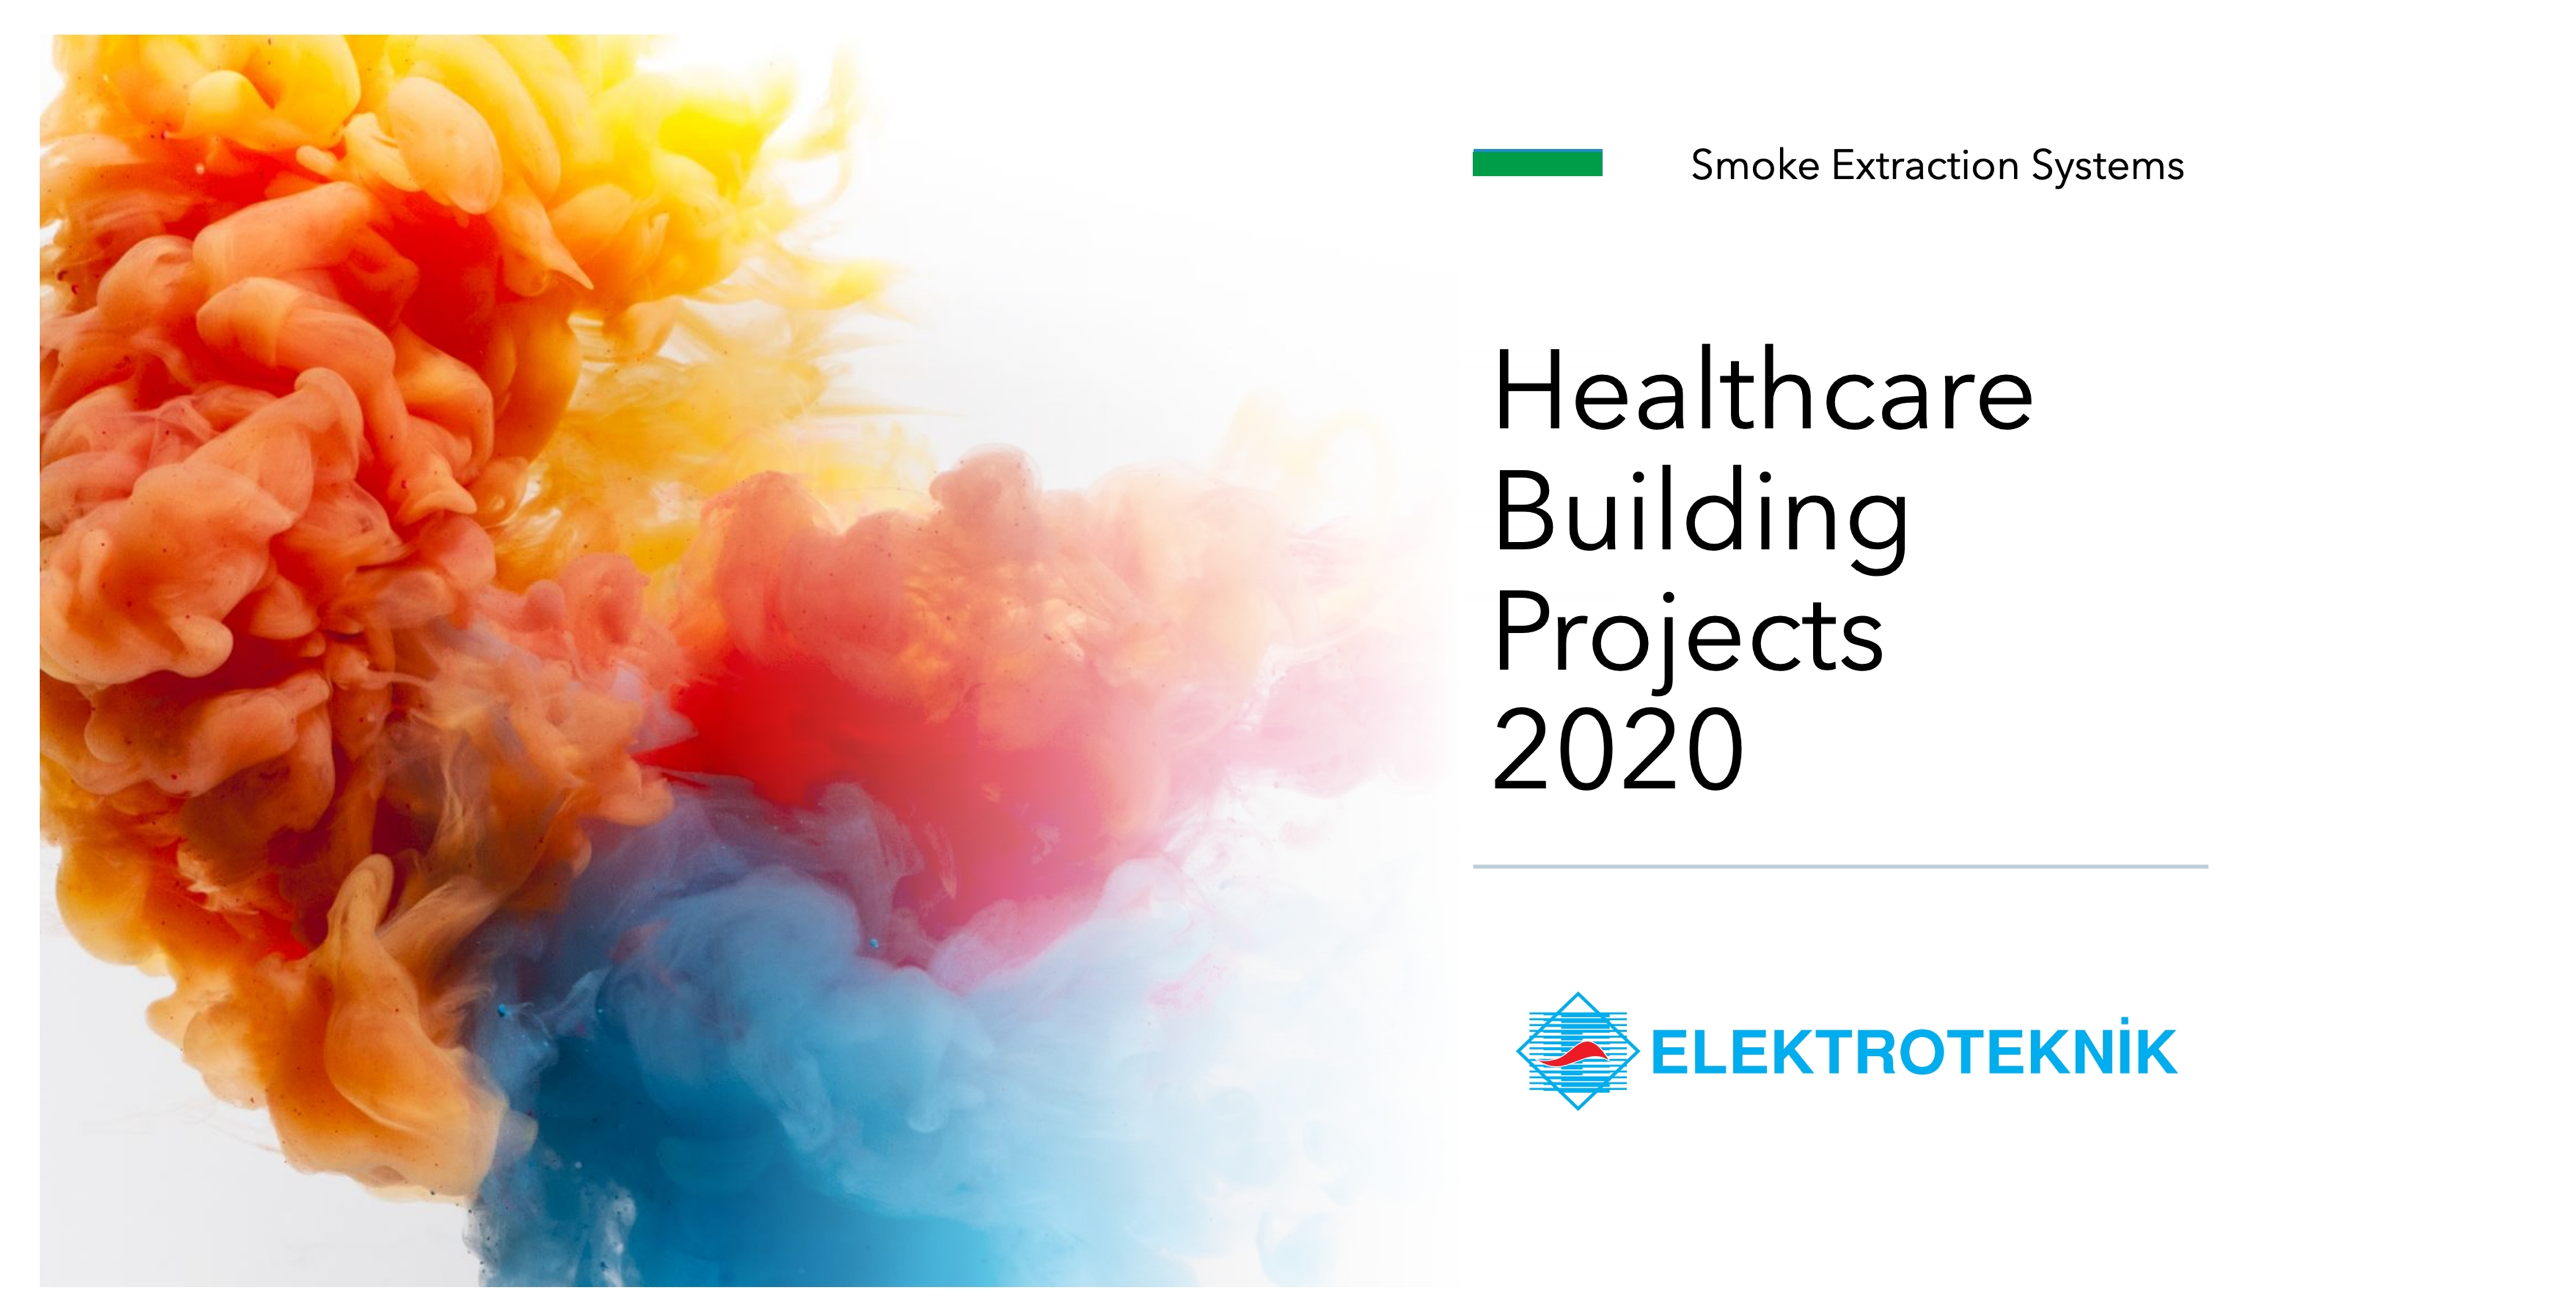 Smoke Extraction Systems for Healthcare Building Projects 2020